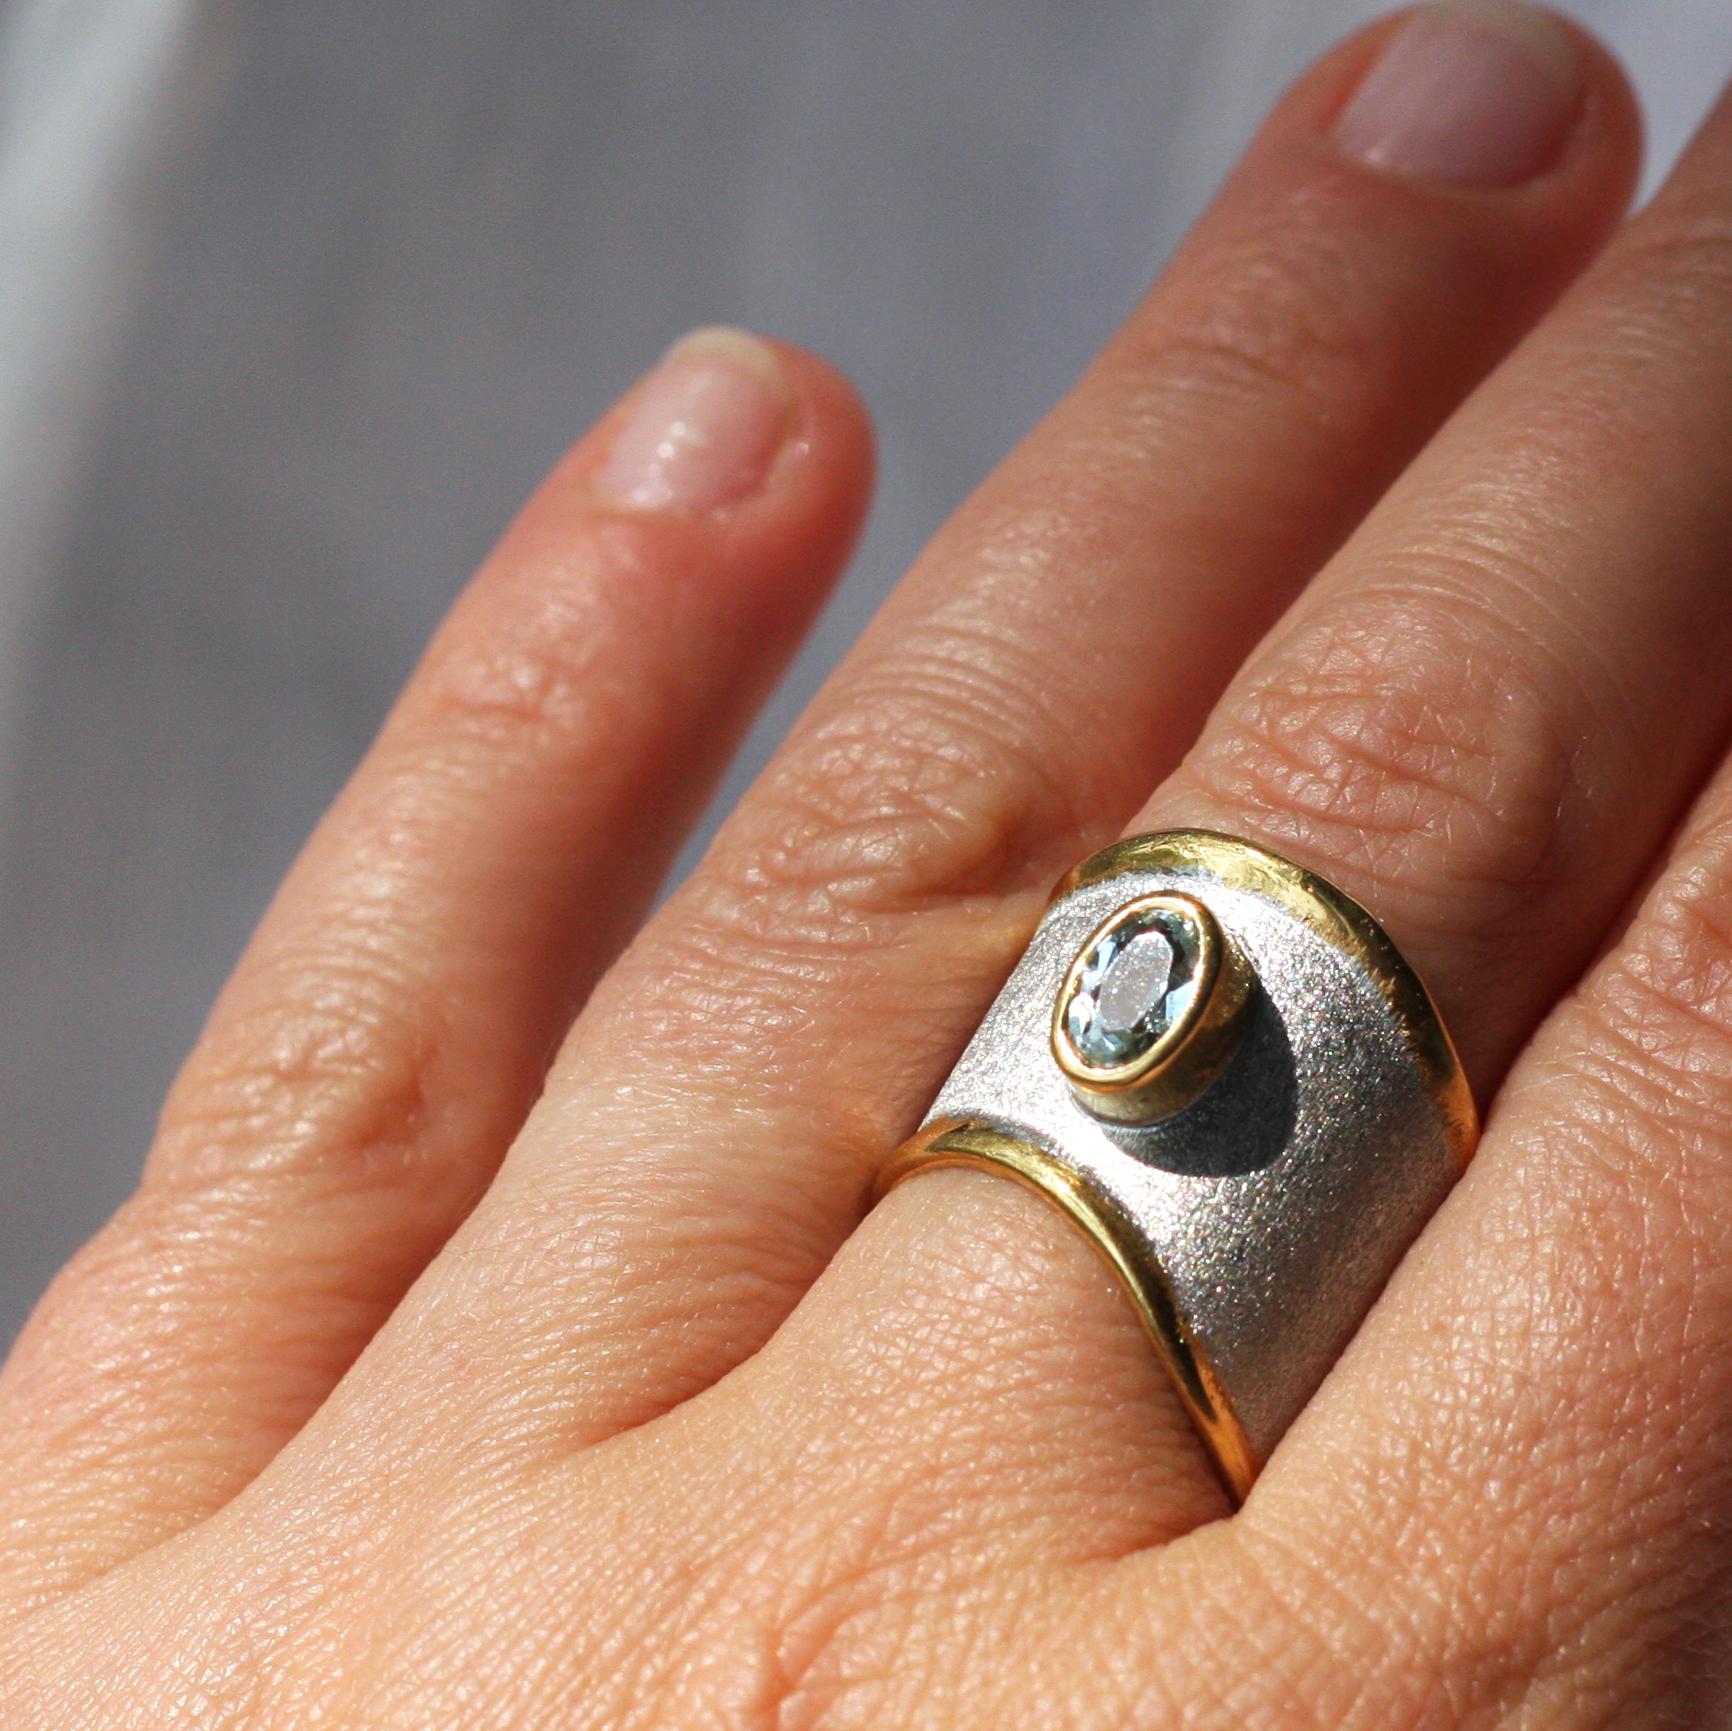 Introducing Yianni Creations Midas Collection handmade artisan ring from fine silver 950 purity plated with palladium to resist the elements. Liquid edges are decorated with an overlay of 24 Karat yellow gold contrasting with a brushed texture of